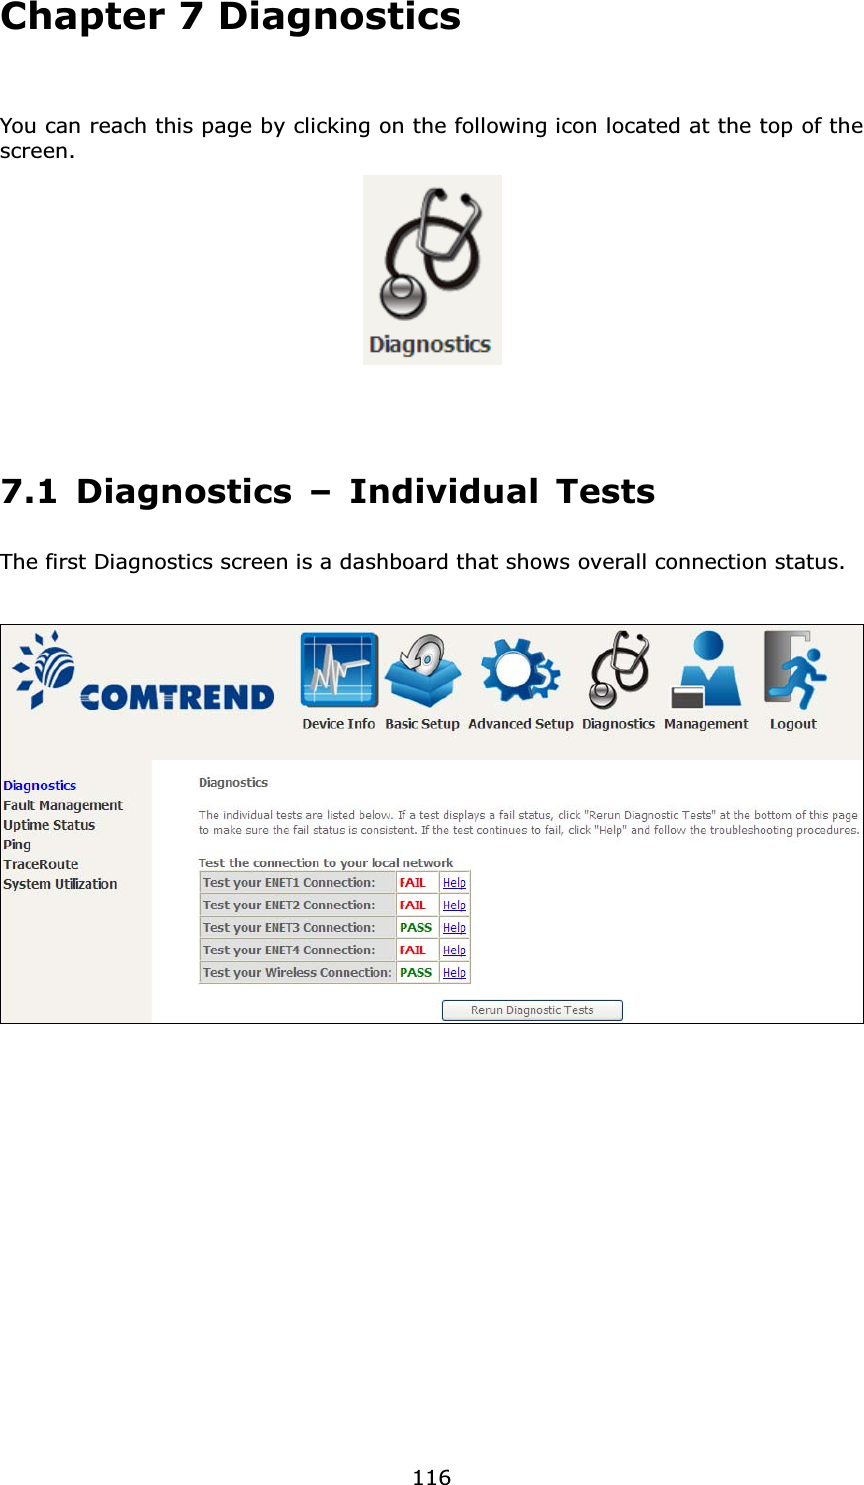 116Chapter 7 DiagnosticsYou can reach this page by clicking on the following icon located at the top of the screen.7.1 Diagnostics – Individual TestsThe first Diagnostics screen is a dashboard that shows overall connection status. 